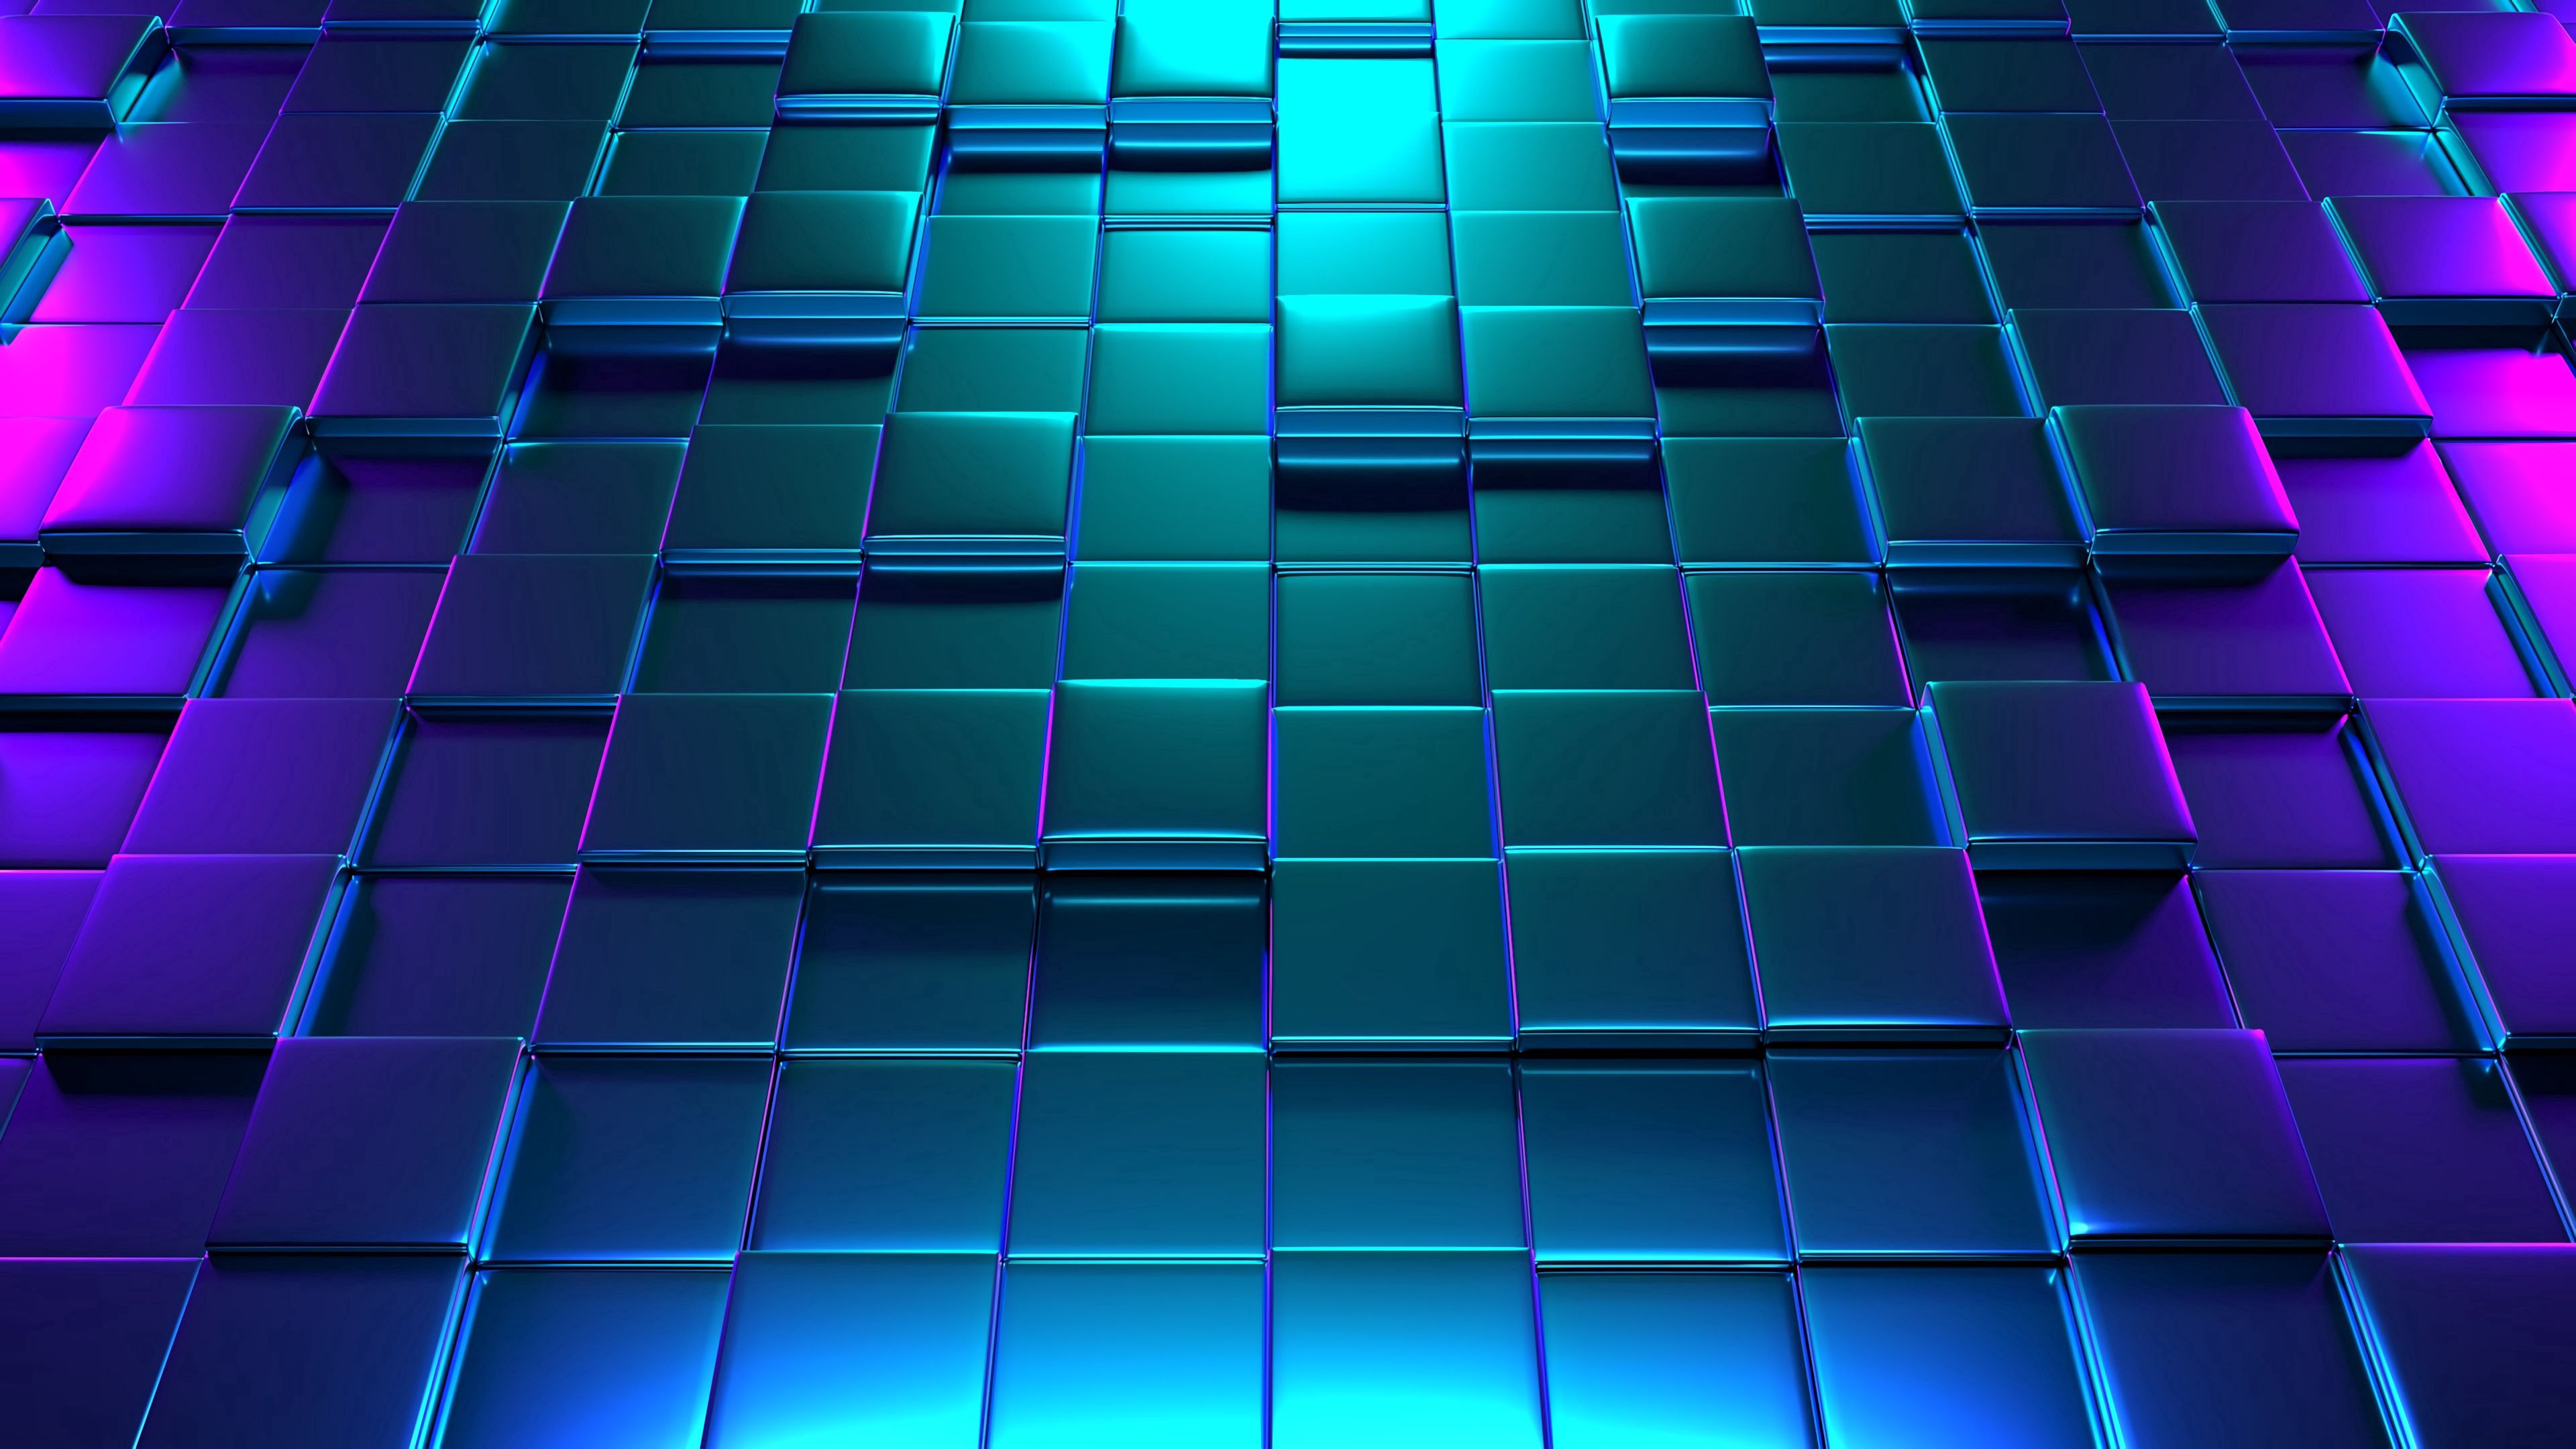 154556 download wallpaper 3d, surface, structure, texture, cubes screensavers and pictures for free